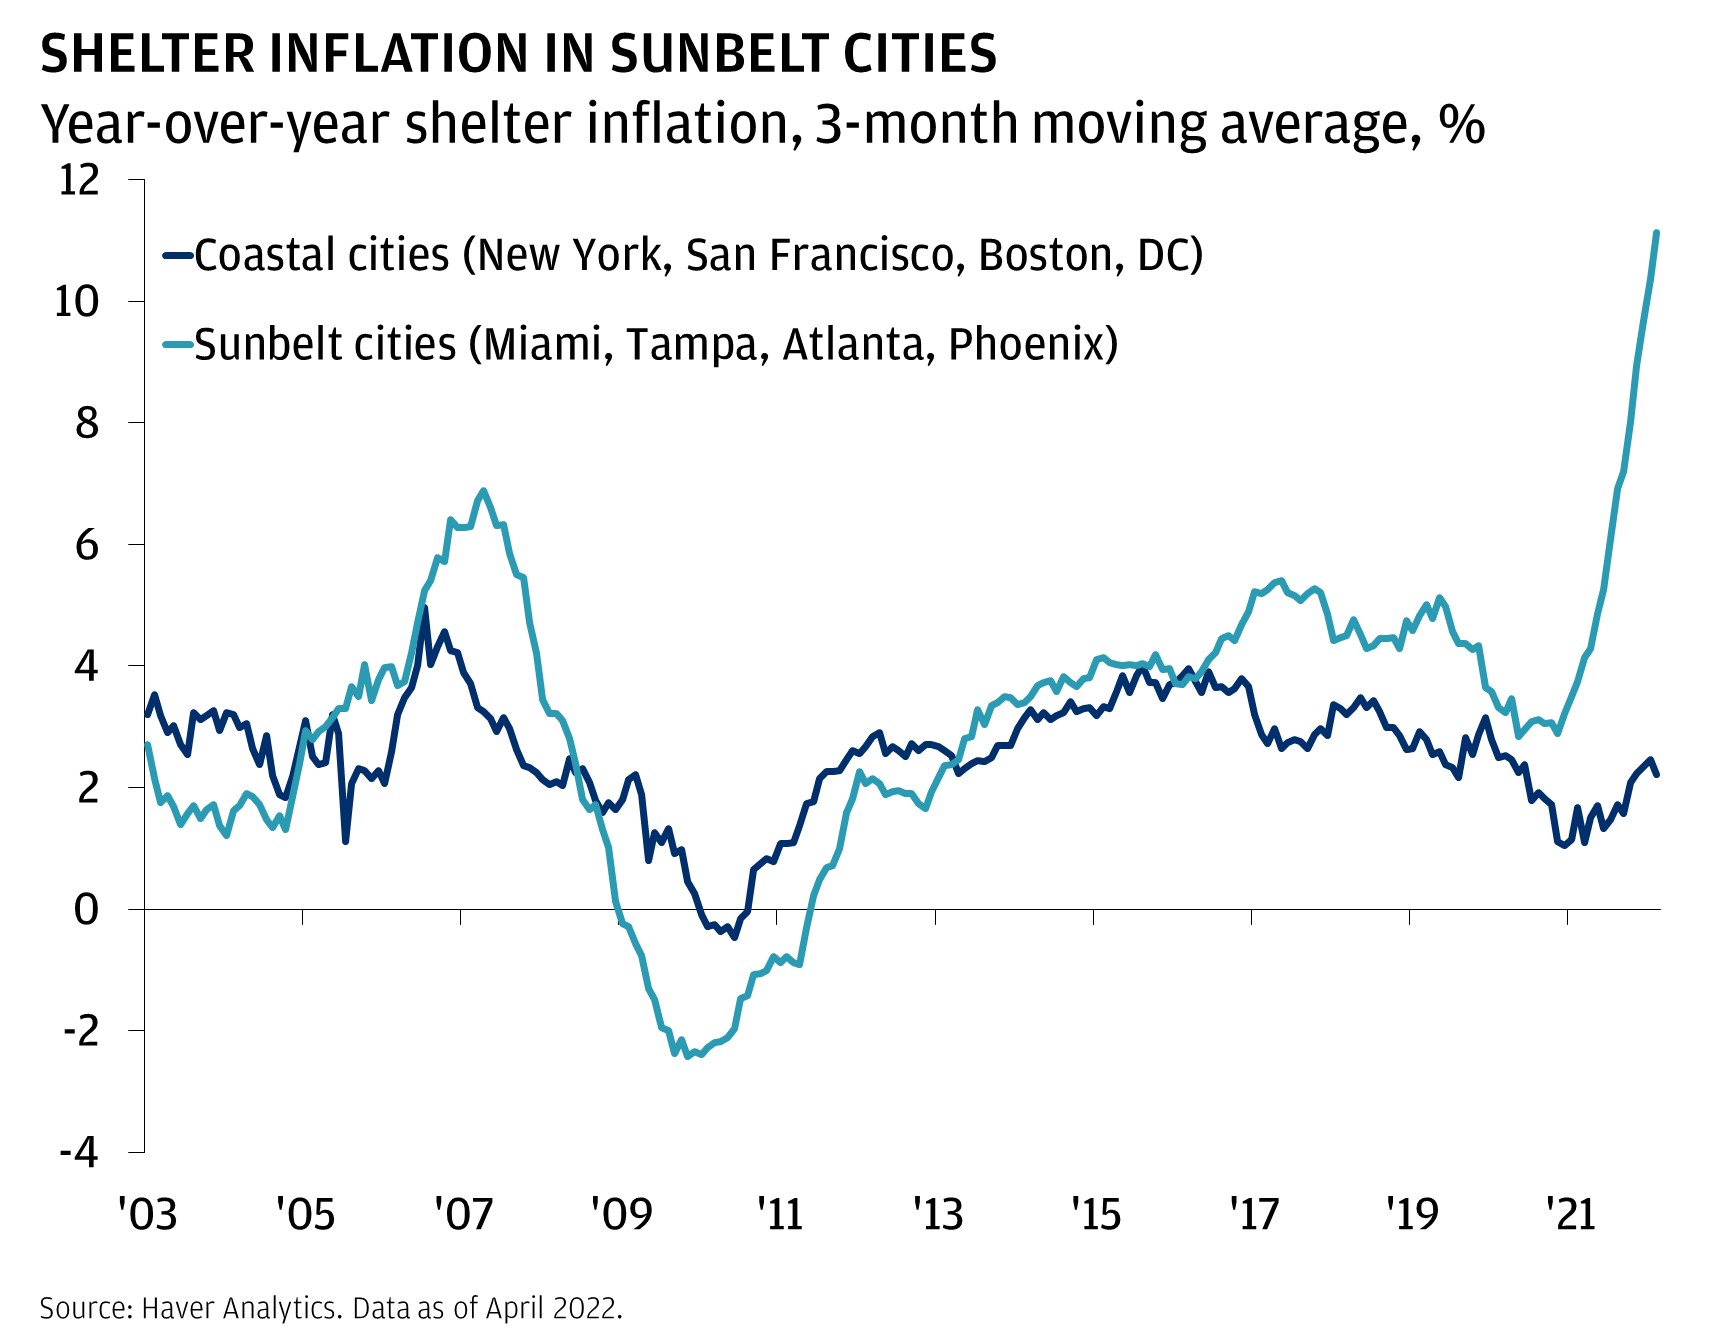 This chart shows year-over-year shelter inflation of coastal and sunbelt cities, from March 2003 to April 2022